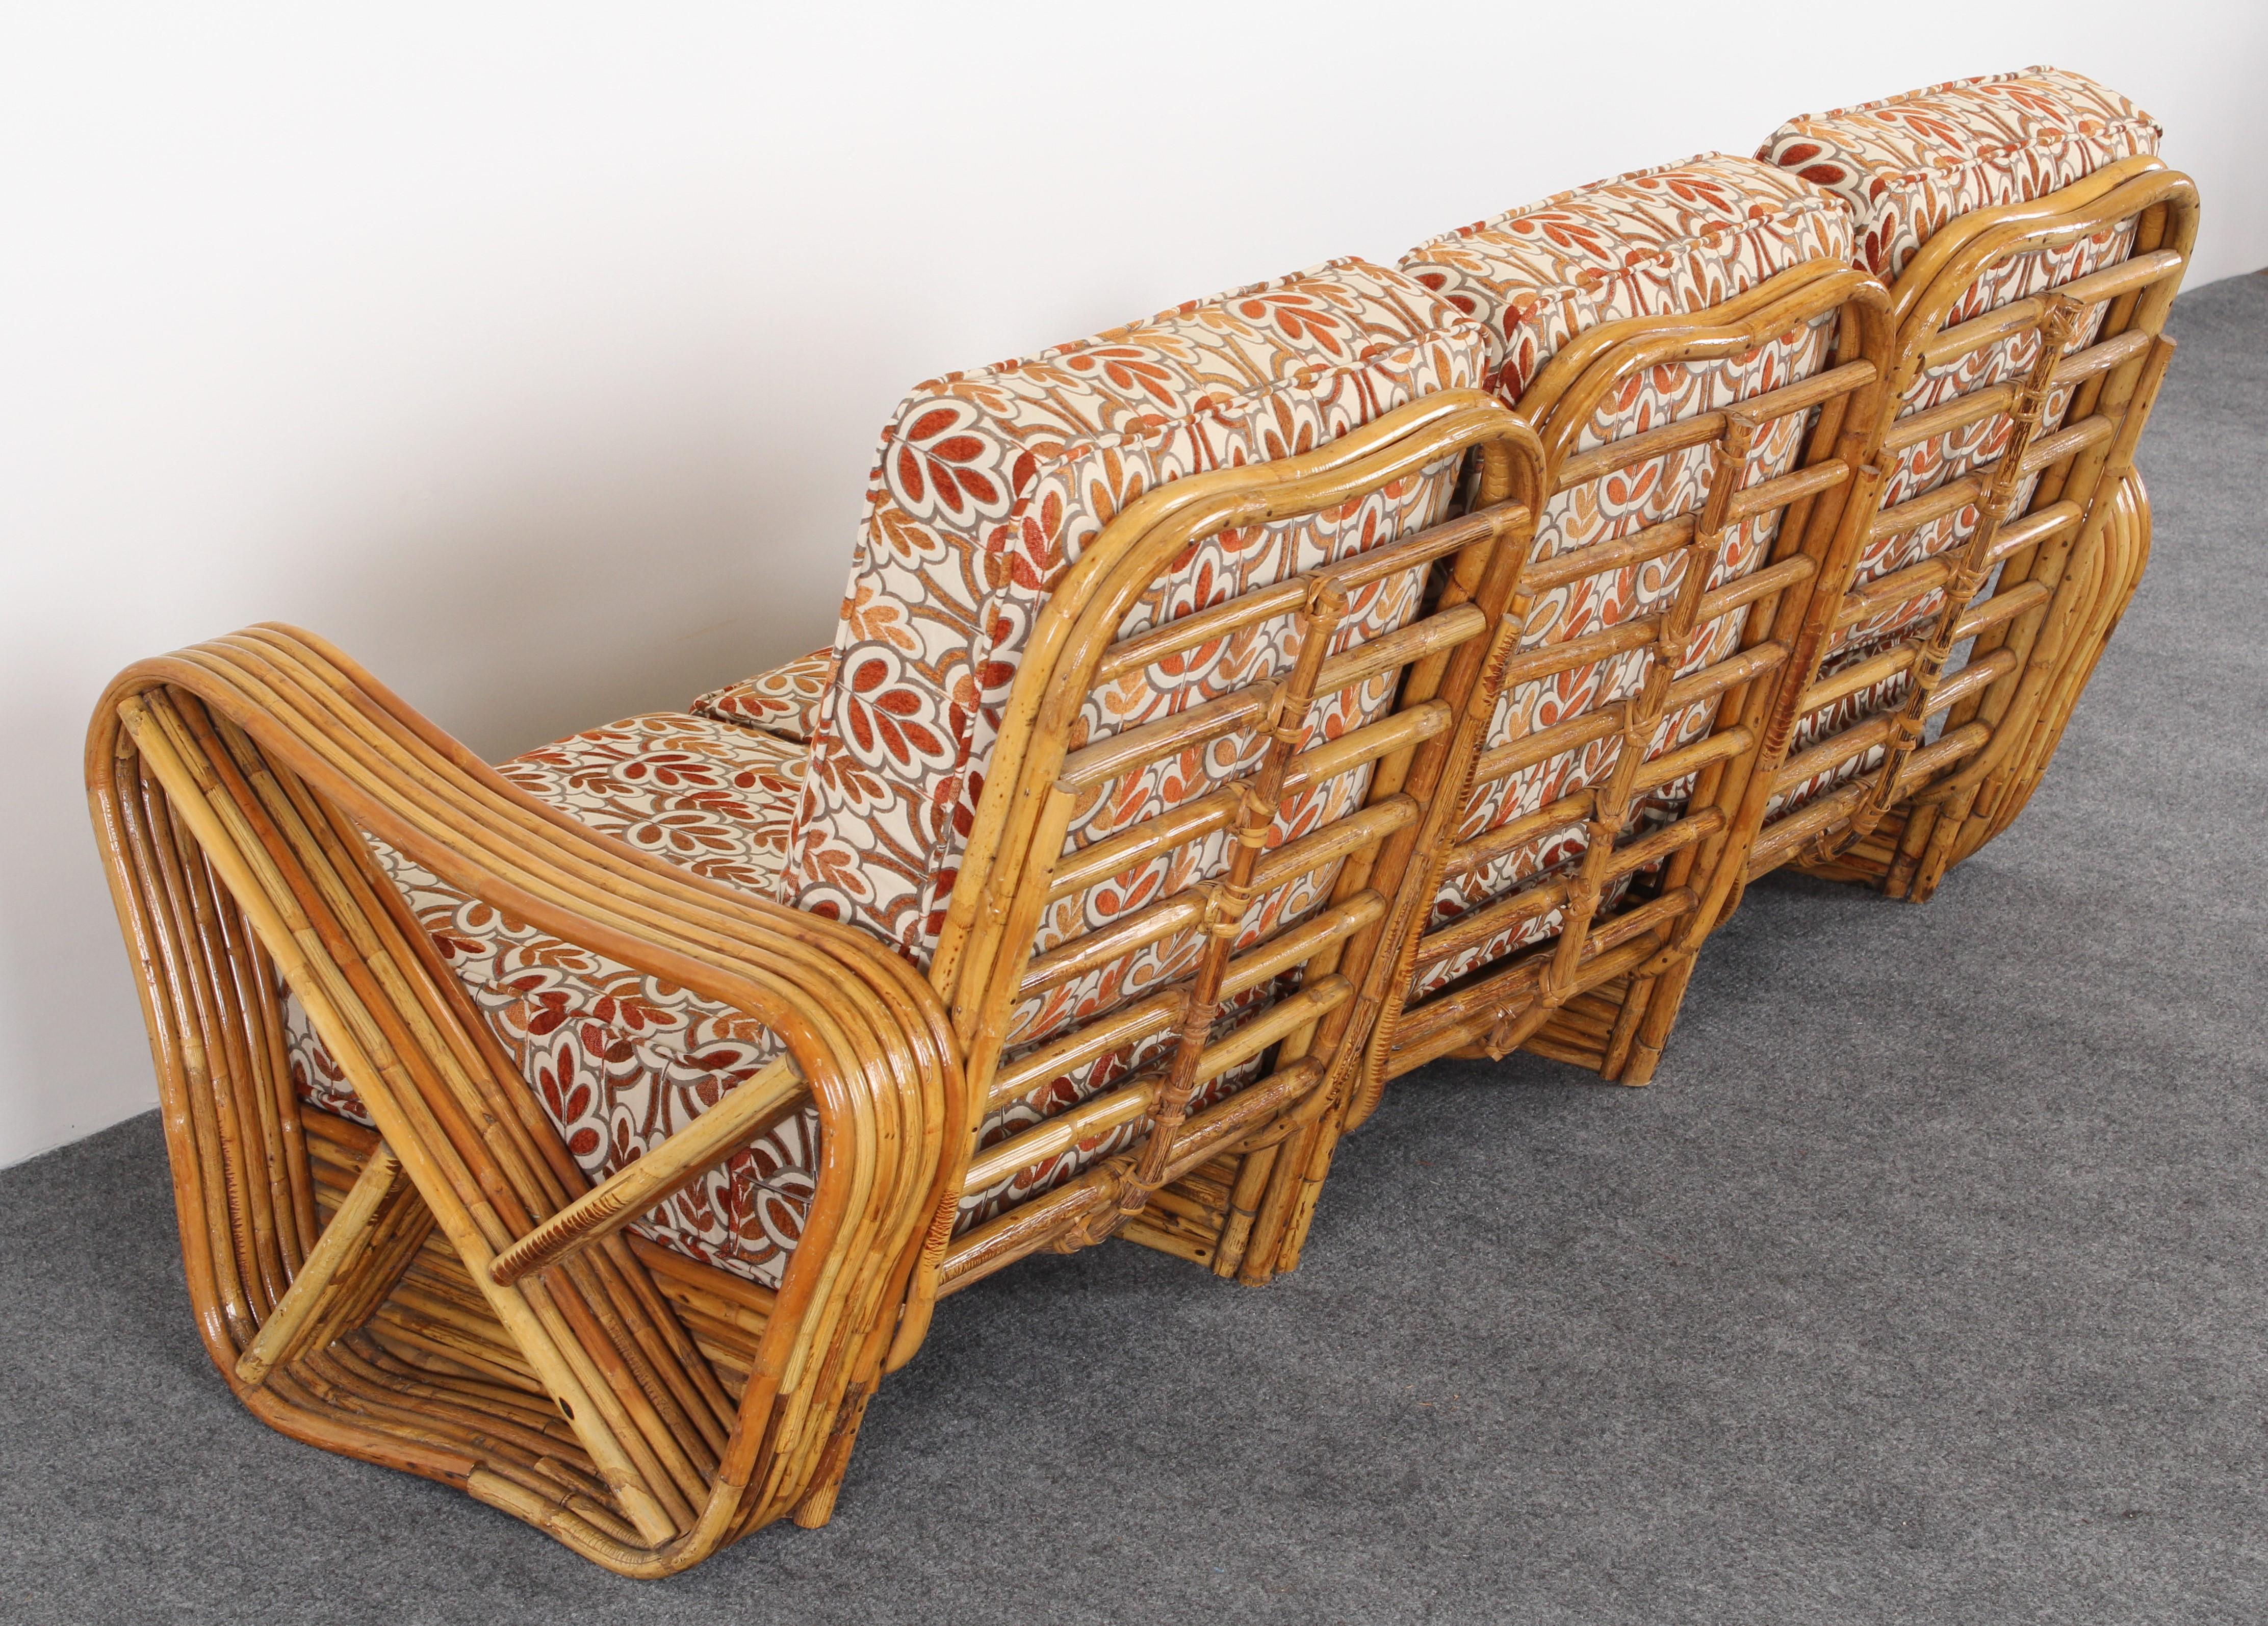 Upholstery Three-Section Paul Frankl Style Bamboo Rattan Sectional Sofa, 1950s